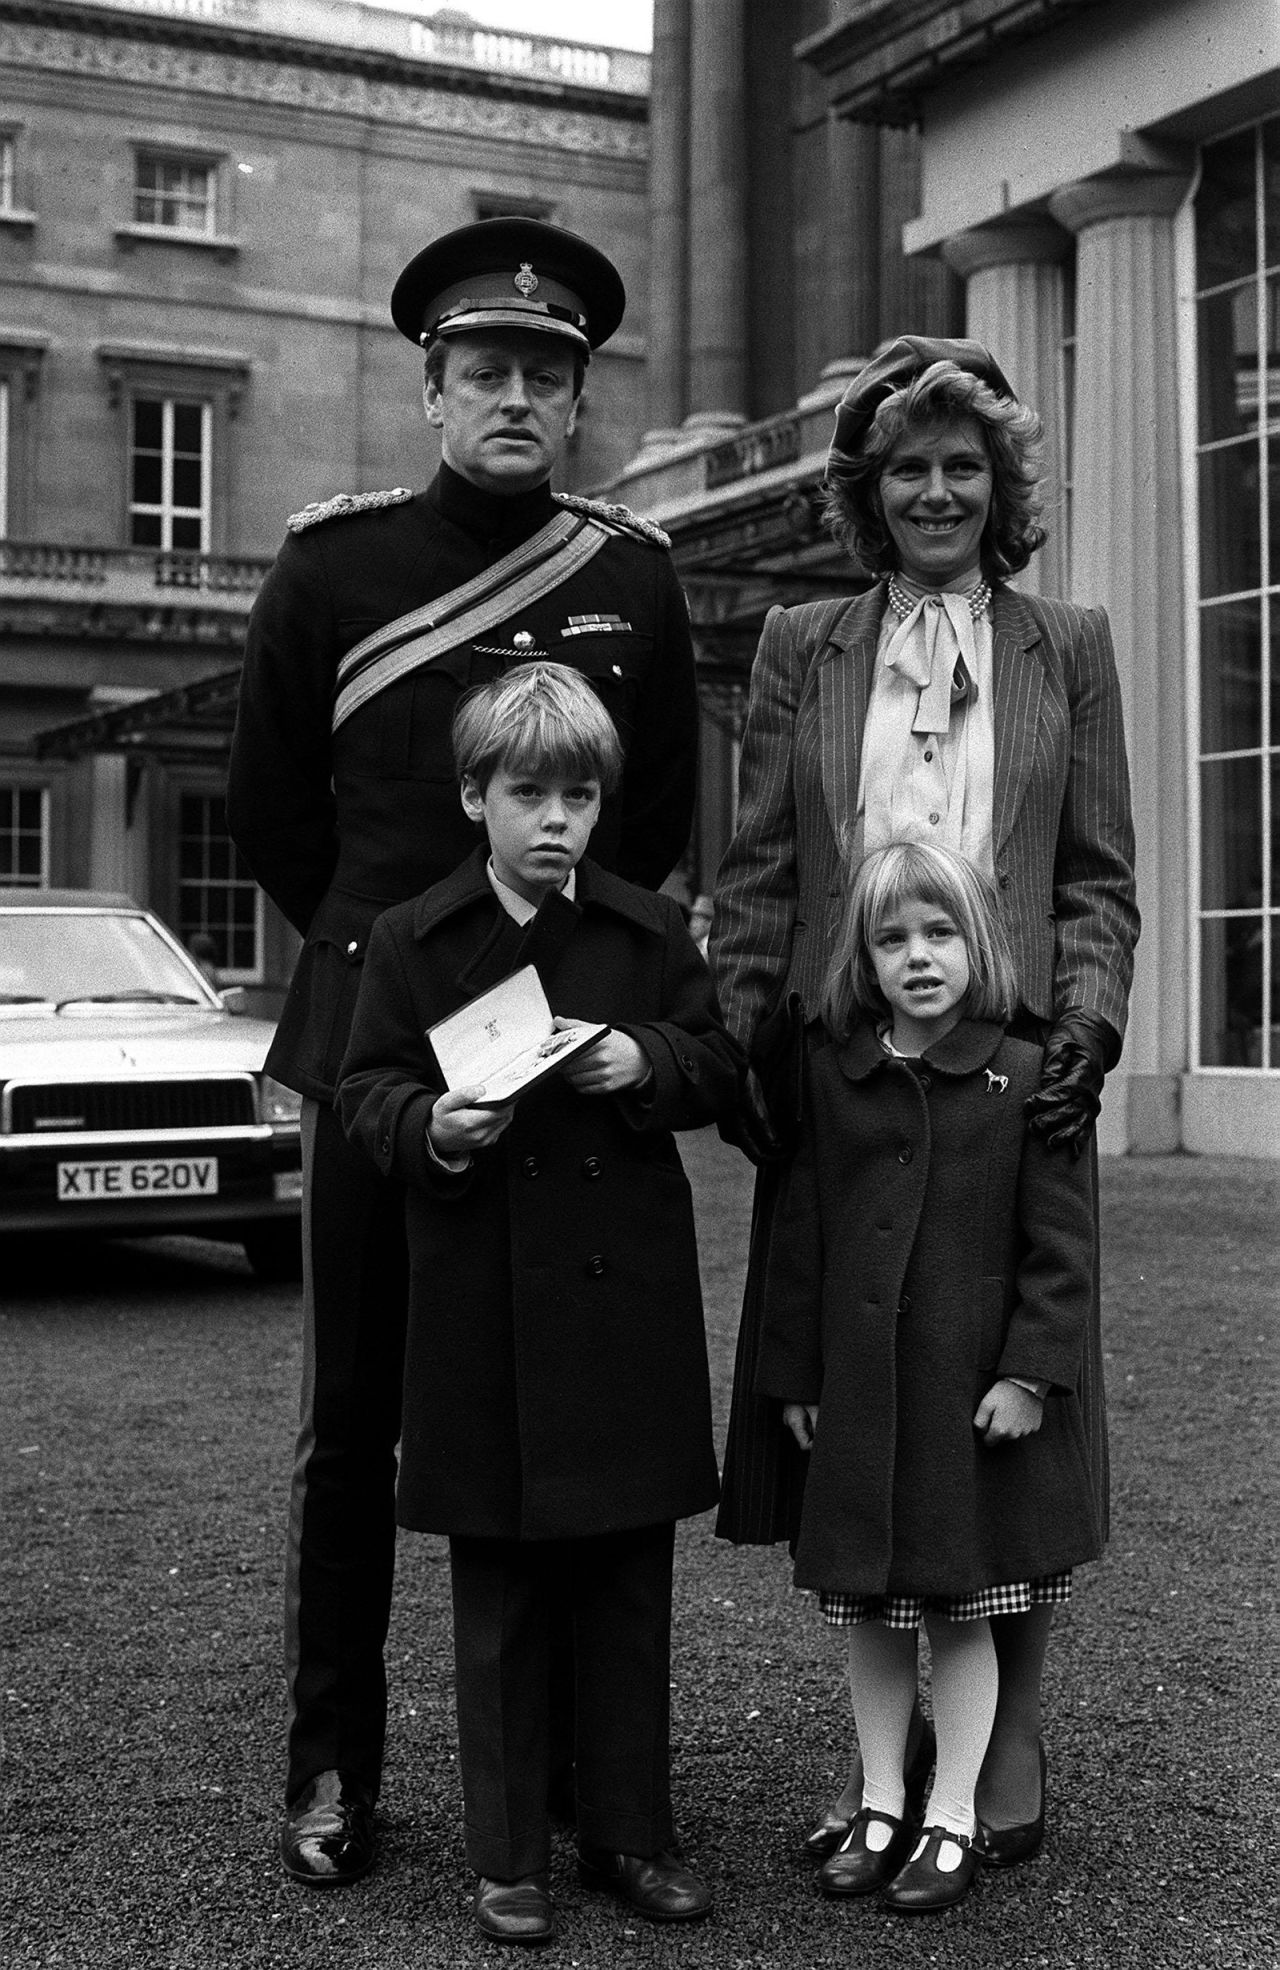 Even in 1984, the markings of Camilla's personal style were already visible. Pictured here with her first husband Andrew, son Tom and daughter Laura, Camilla's three-strand pearl necklace, structured blazer and off-center beret are pieces she has gone on to wear again and again.